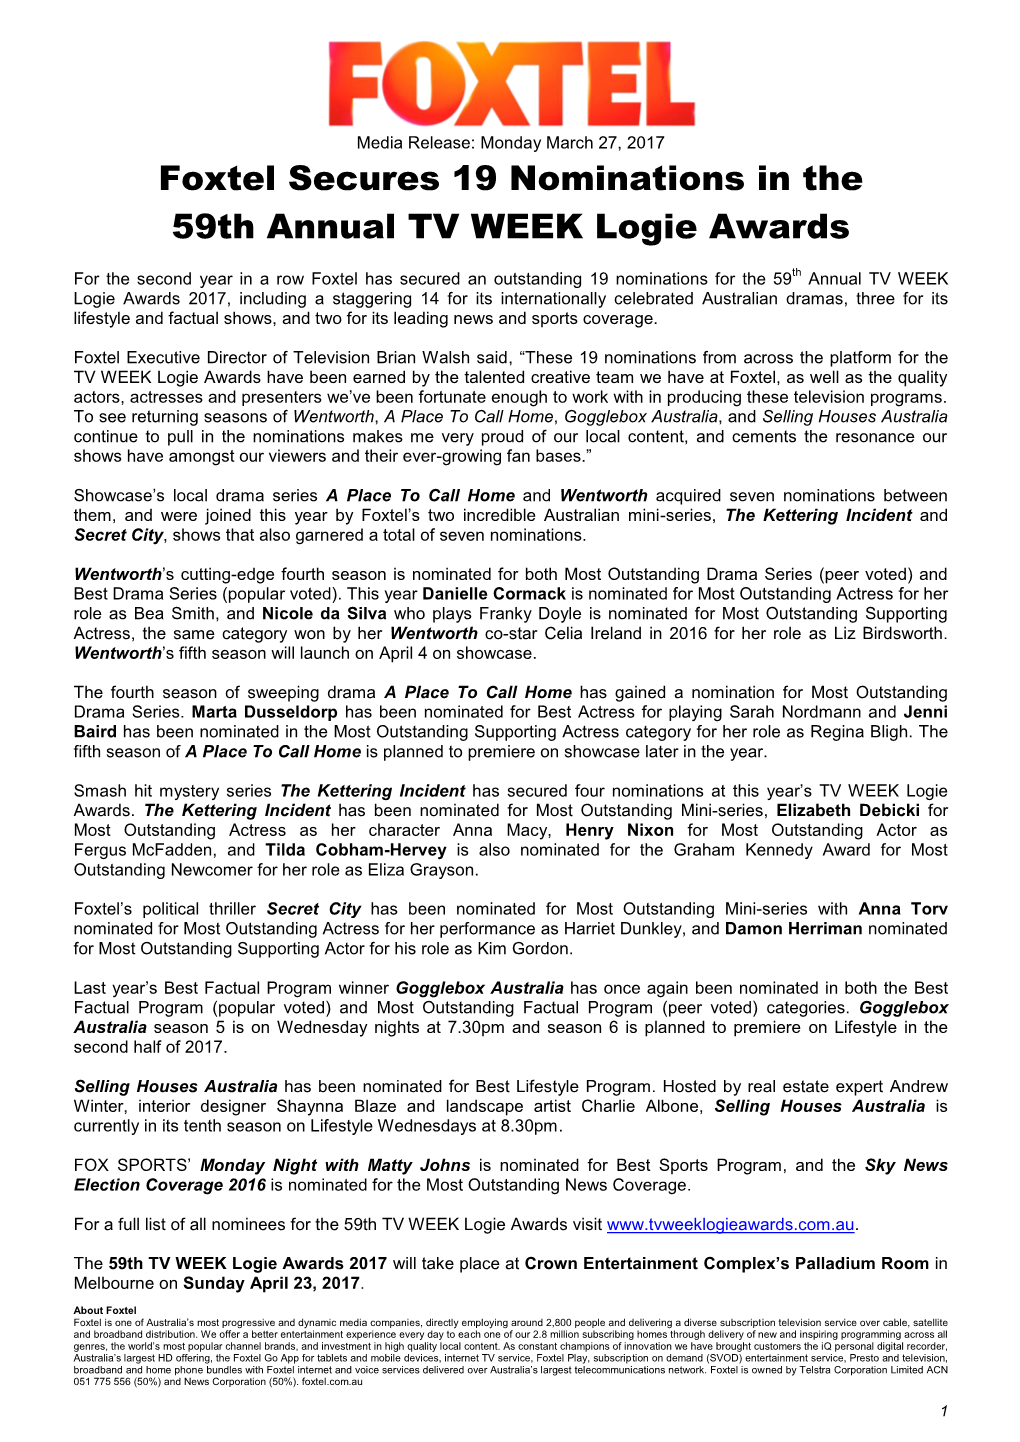 Foxtel Secures 19 Nominations in the 59Th Annual TV WEEK Logie Awards